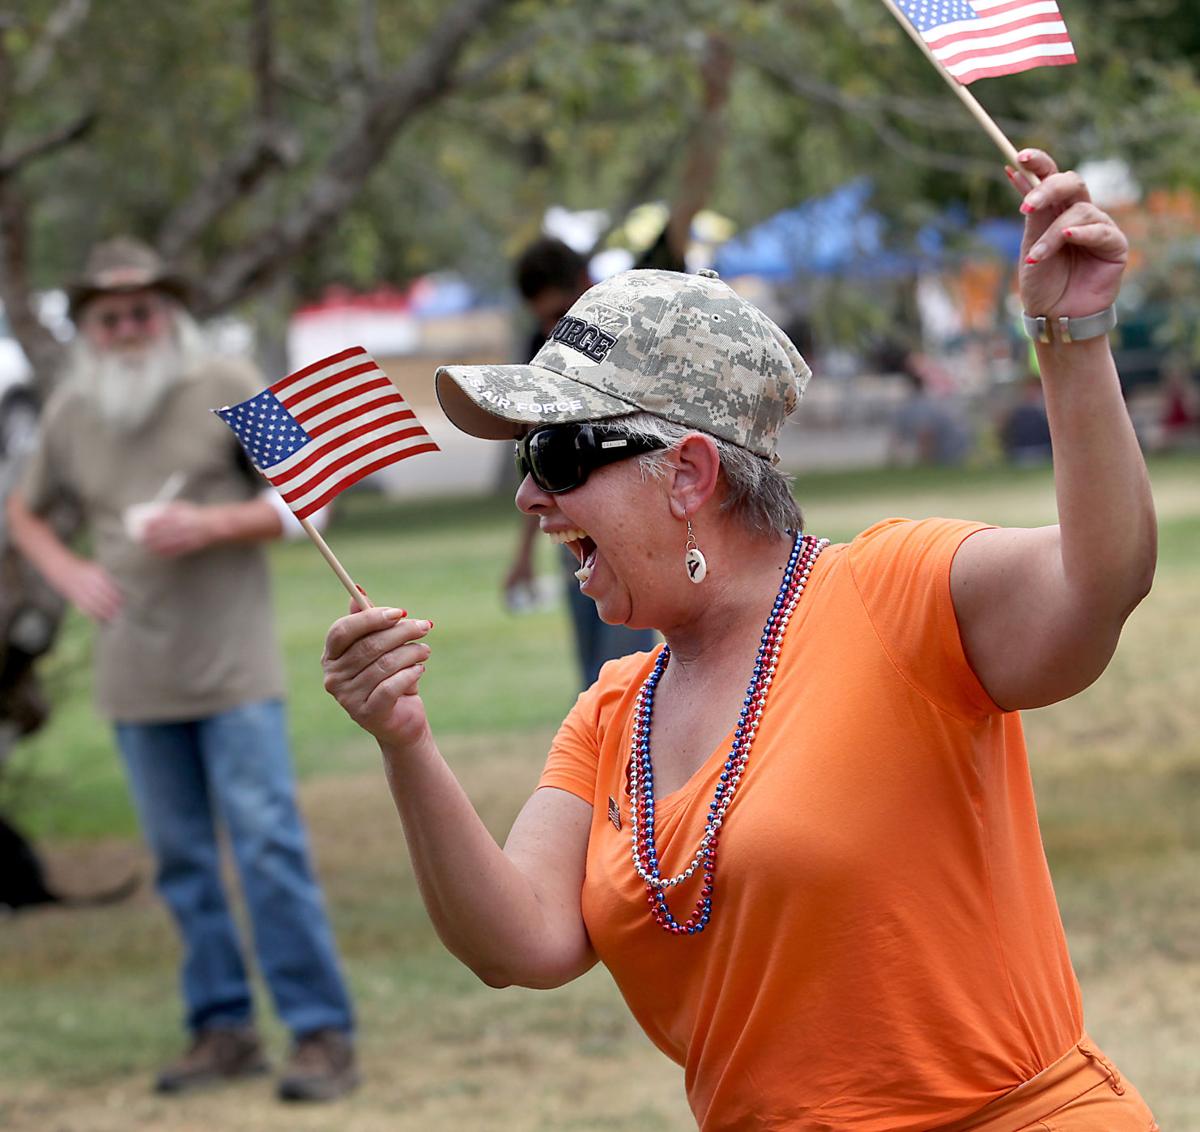 Sierra Vista packed with patriotic events for July 4th Local News